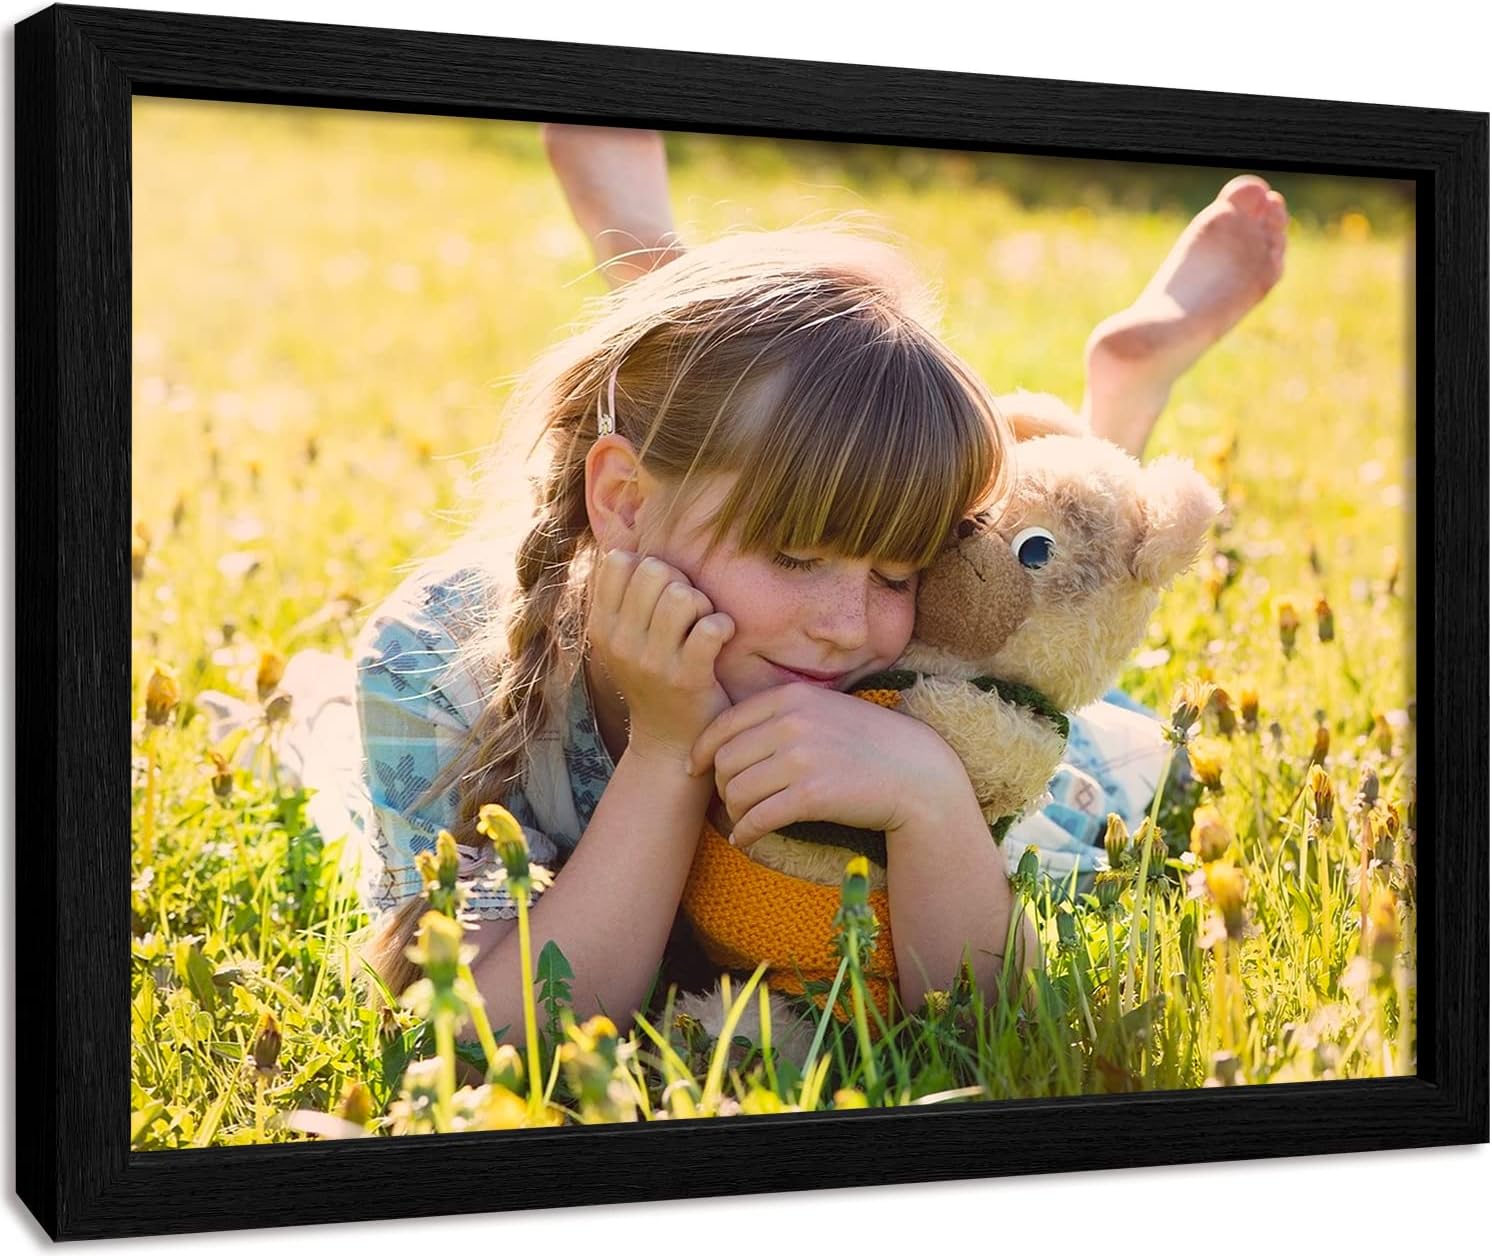 Custom Canvas Prints With Your Photos for Pet Family Photo Prints Personalized Canvas Framed Wall Art (Wood Black, 10 x 8)